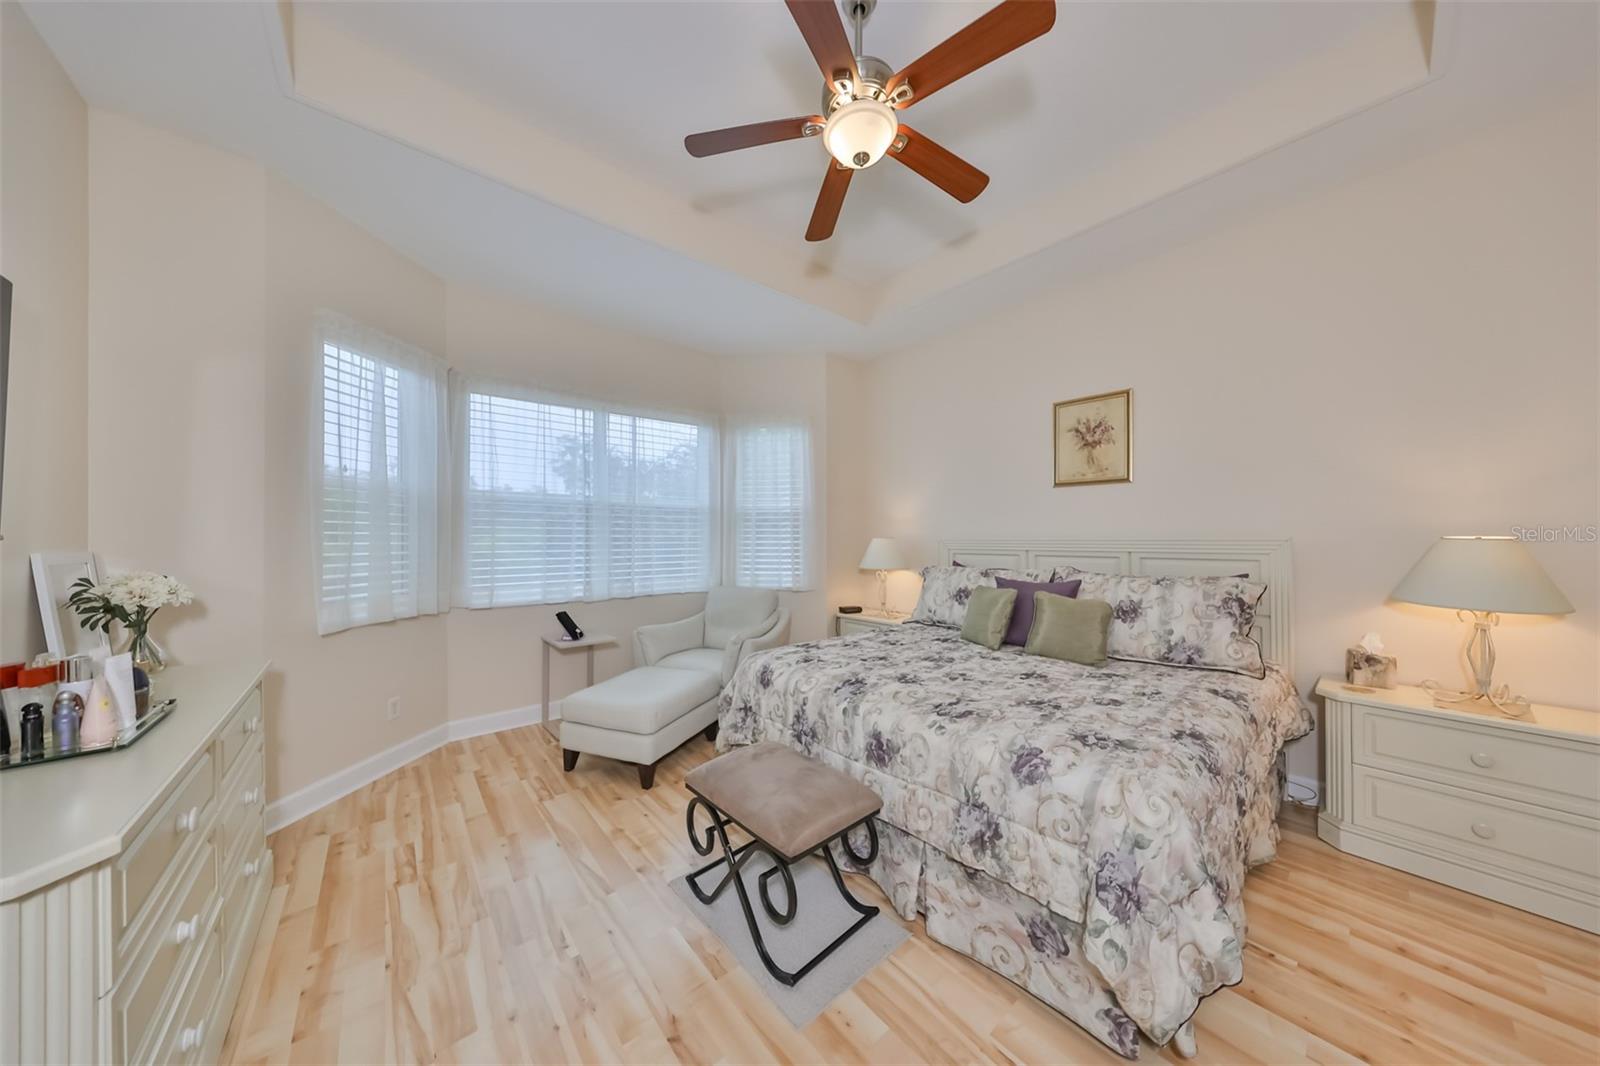 Primary Bedroom has a stunning view of the Manatee State Park.  The beautiful laminate flooring handsomely accepts this entire room.